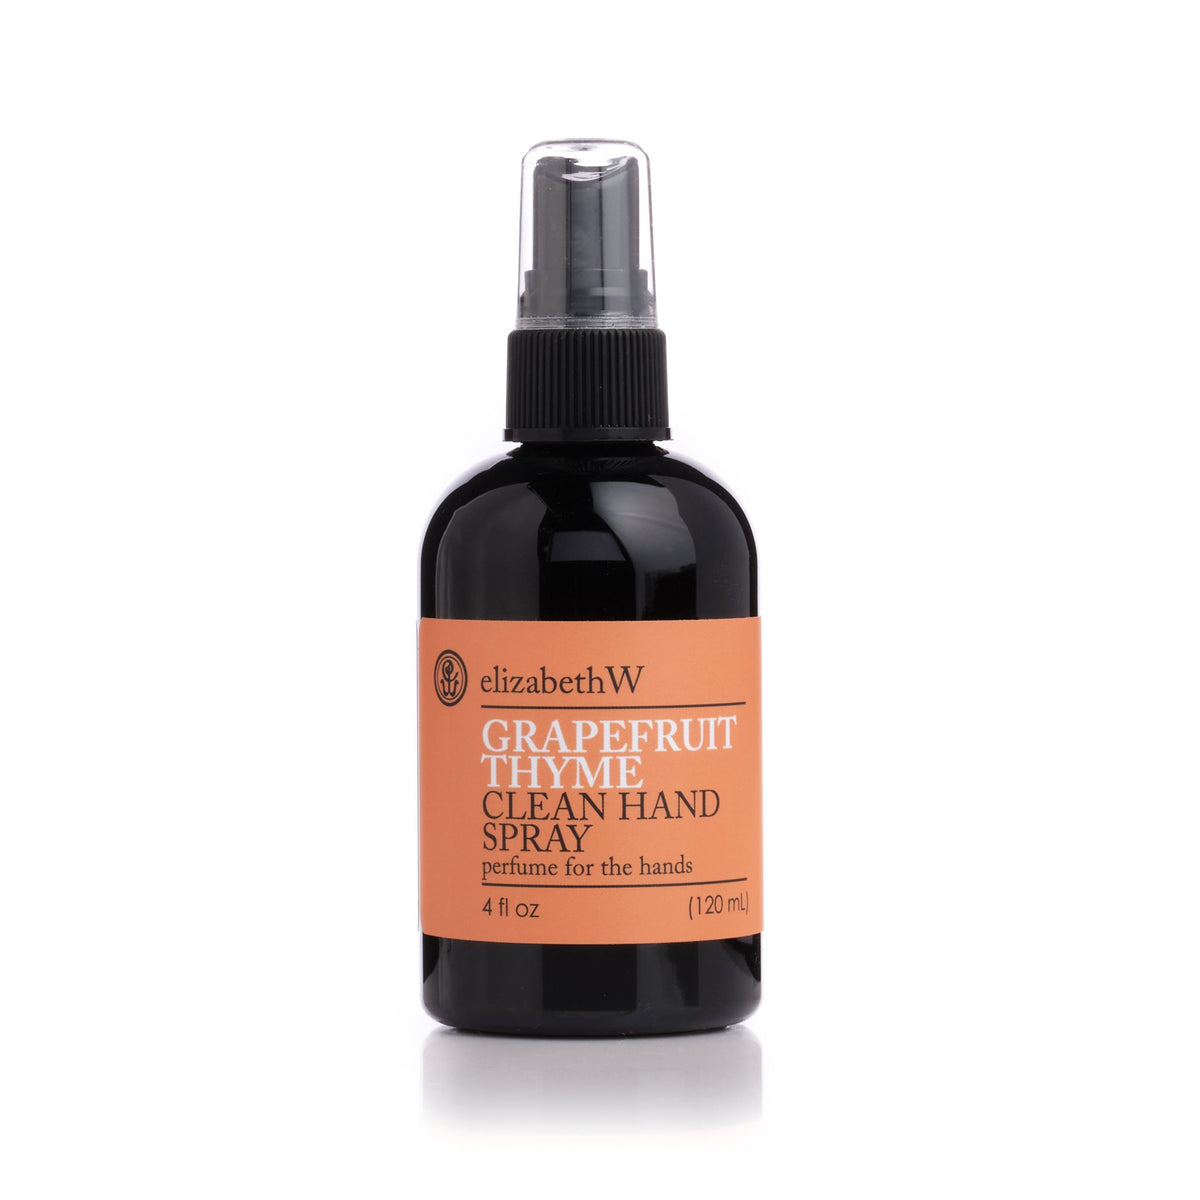 A bottle of elizabeth W Botanical Beauty Grapefruit Thyme Clean Hand Spray with a citrus aroma and a spray nozzle, labeled clearly and set against a white background. The bottle is 4 fl oz (120mL).